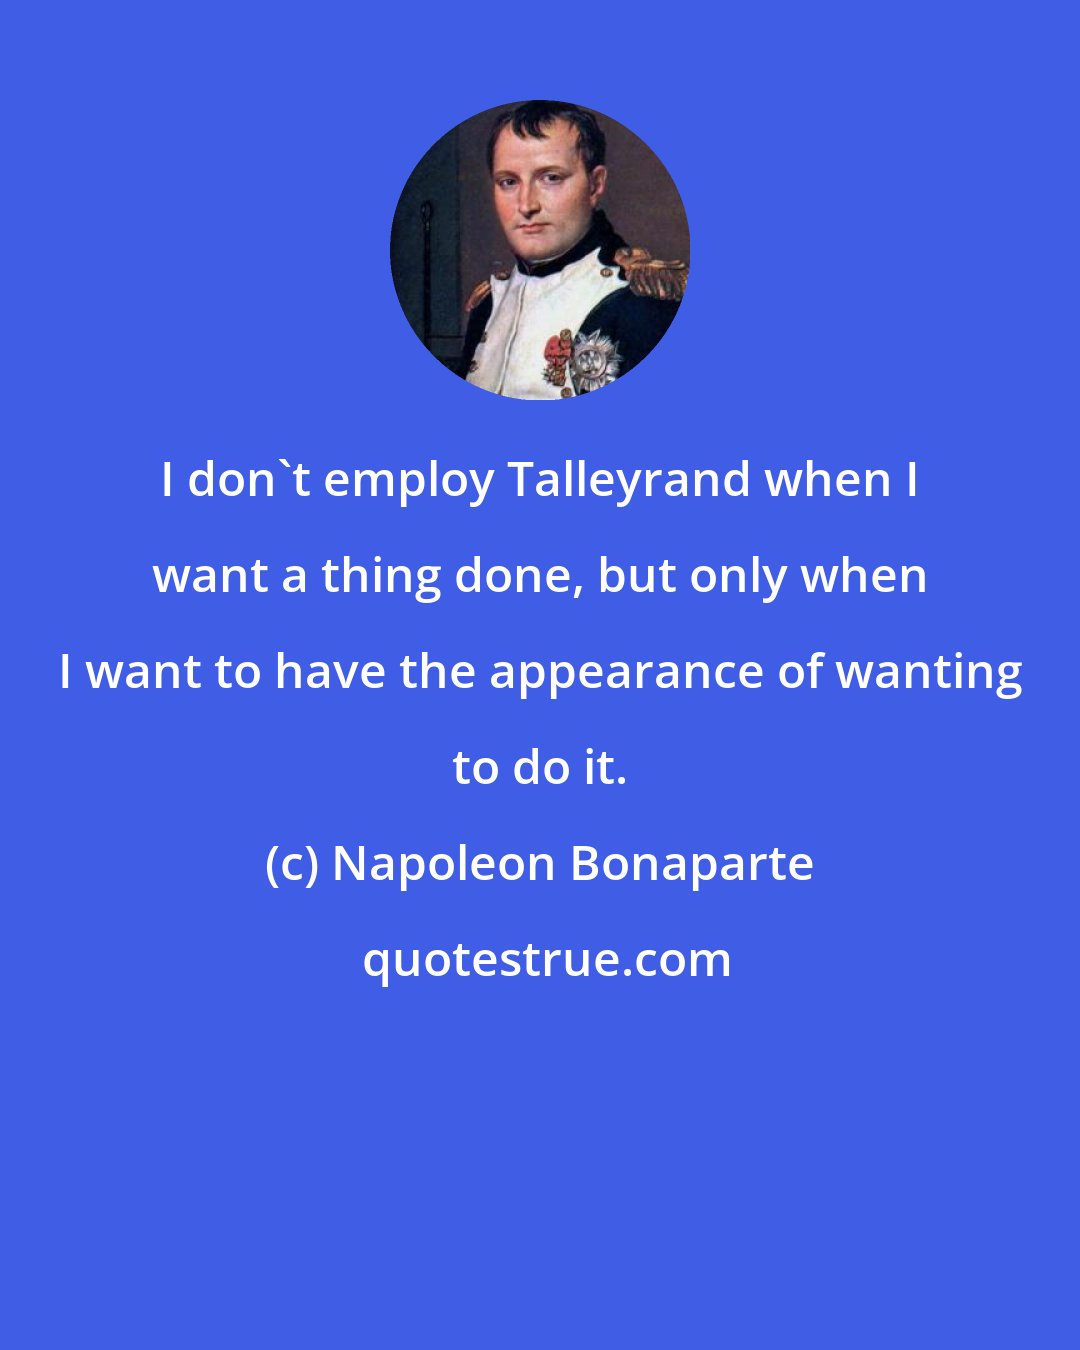 Napoleon Bonaparte: I don't employ Talleyrand when I want a thing done, but only when I want to have the appearance of wanting to do it.